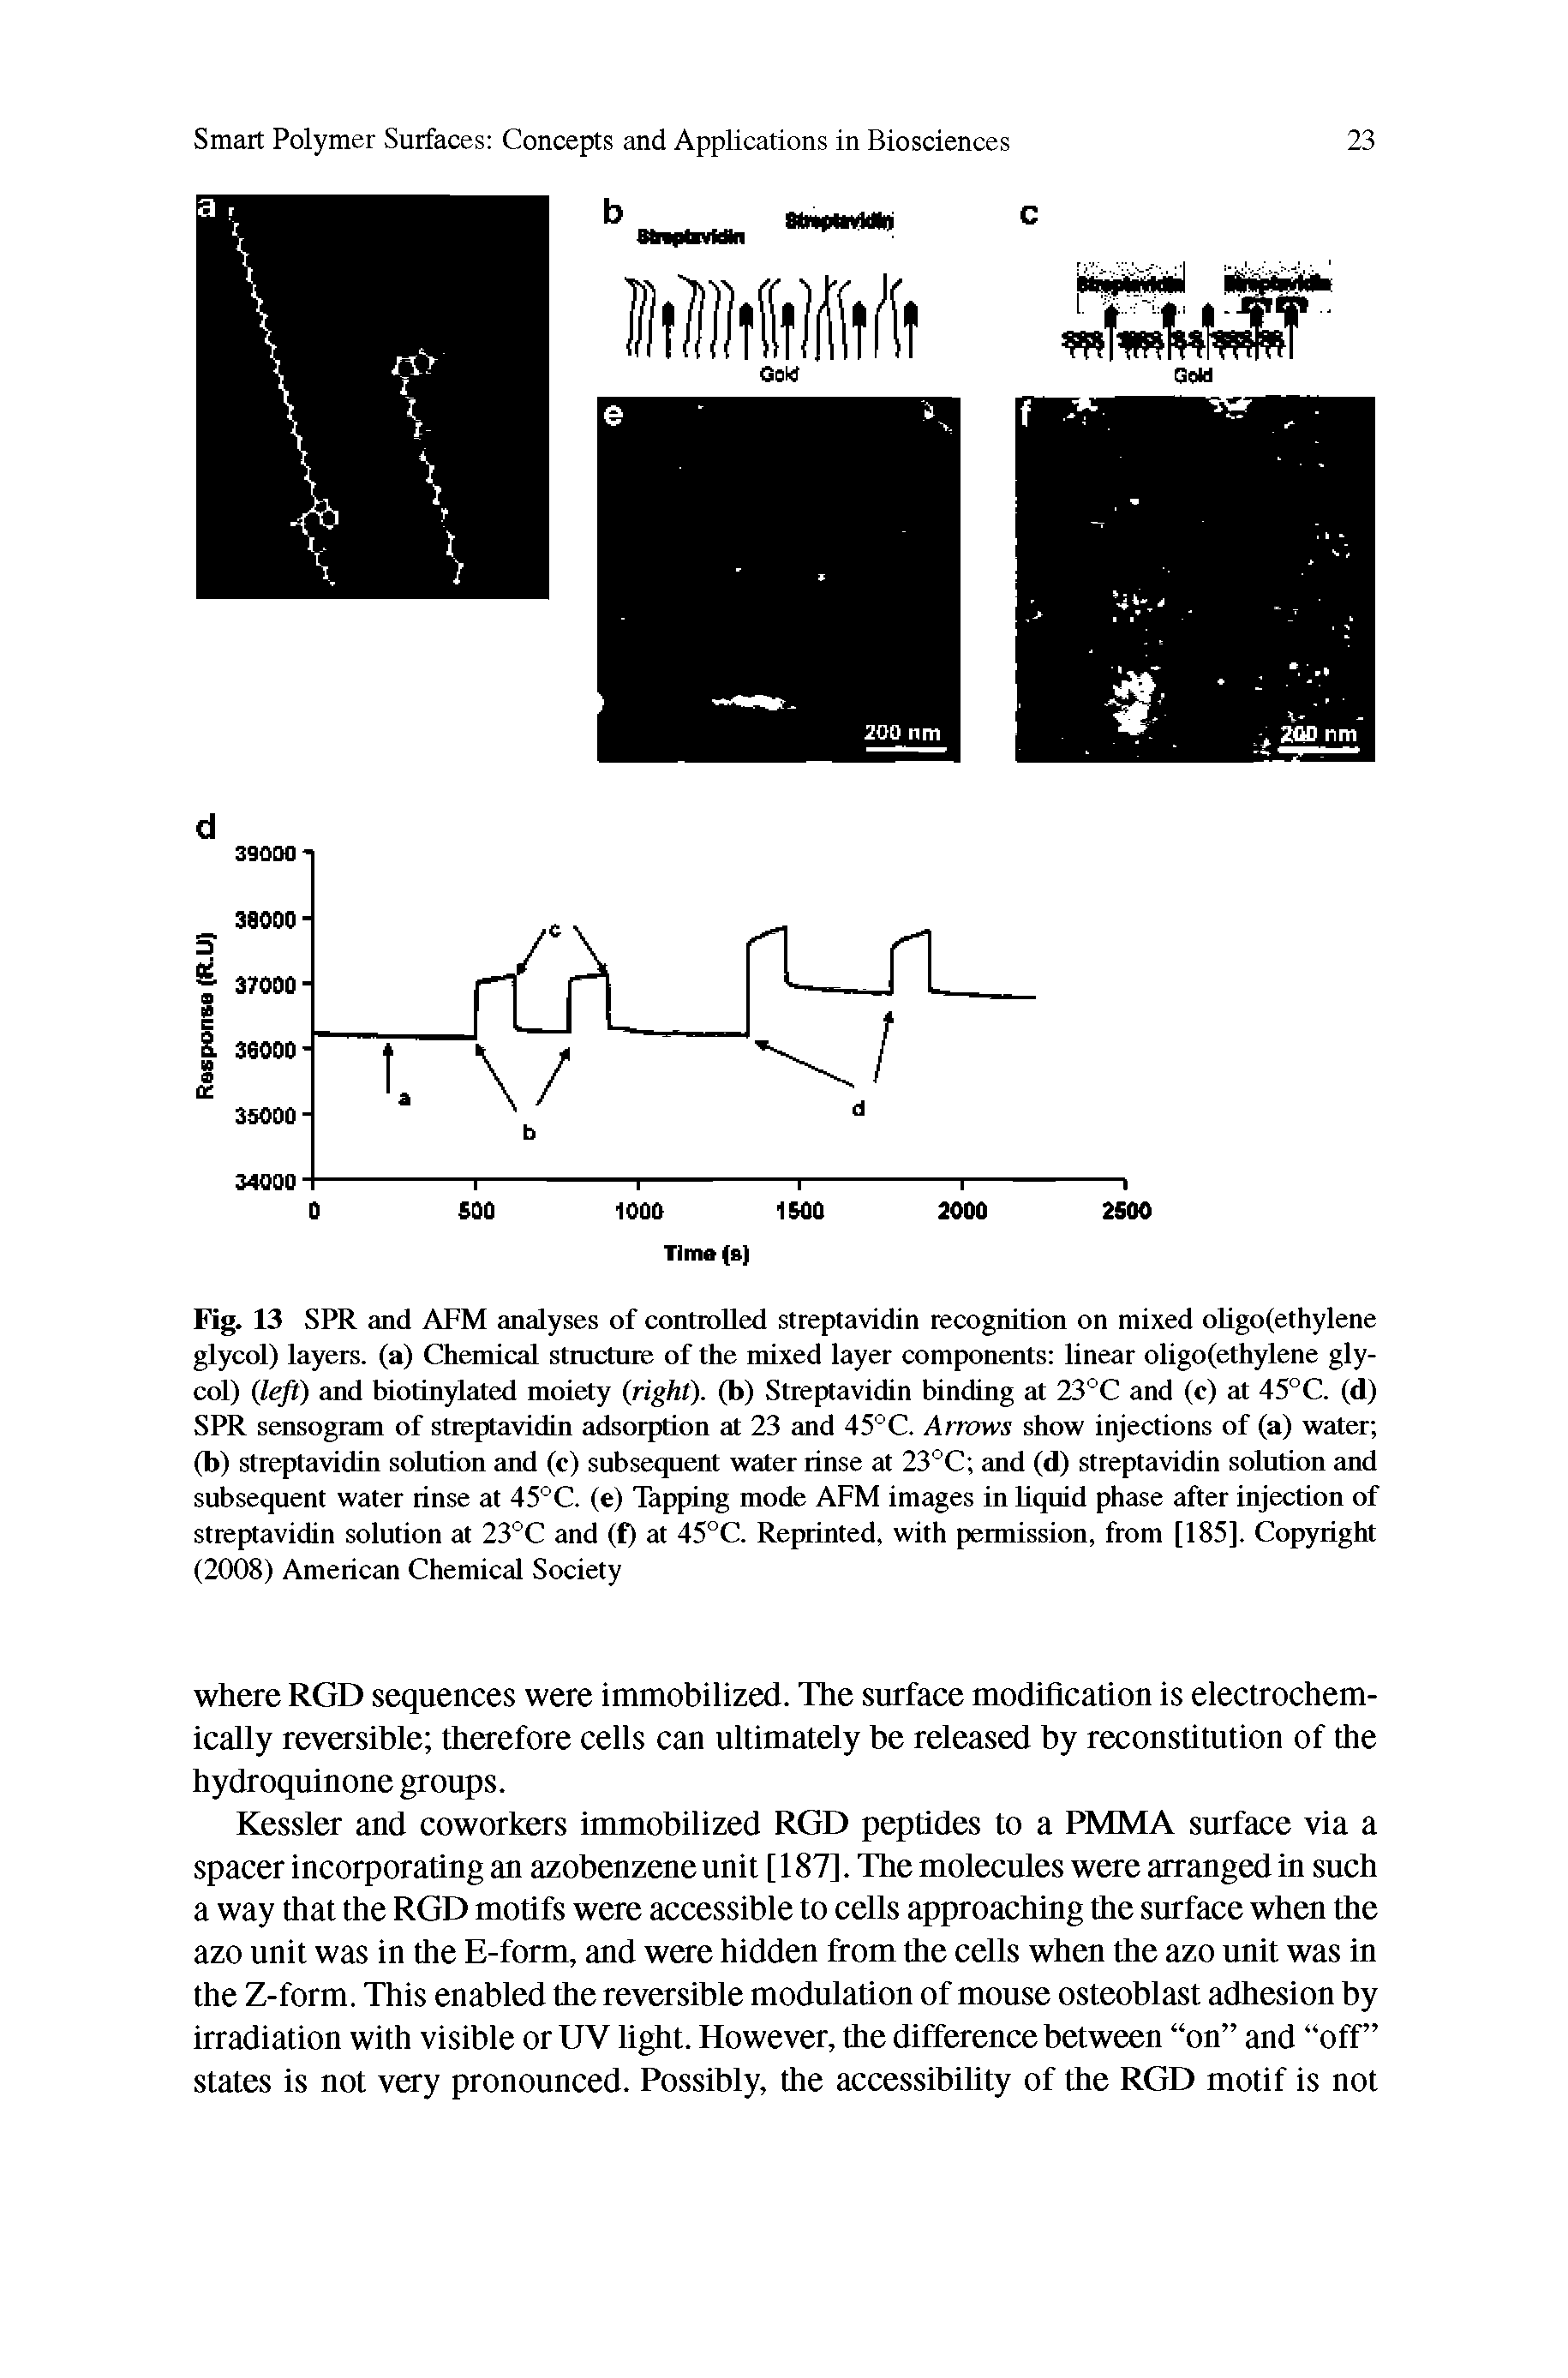 Fig. 13 SPR and AFM analyses of controlled streptavidin recognition on mixed oligo(ethylene glycol) layers, (a) Chemical structure of the mixed layer components linear oligo(ethylene glycol) left) and biotinylated moiety (right), (b) Streptavidin binding at 23°C and (c) at 45°C. (d) SPR sensogram of streptavidin adsorption at 23 and 45°C. Arrows show injections of (a) water (b) streptavidin solution and (c) subsequent water rinse at 23°C and (d) streptavidin solution and subsequent water rinse at 45°C. (e) Tapping mode AFM images in liquid phase after injection of streptavidin solution at 23°C and (f) at 45°C. Reprinted, with permission, from [185]. Copyright (2008) American Chemical Society...